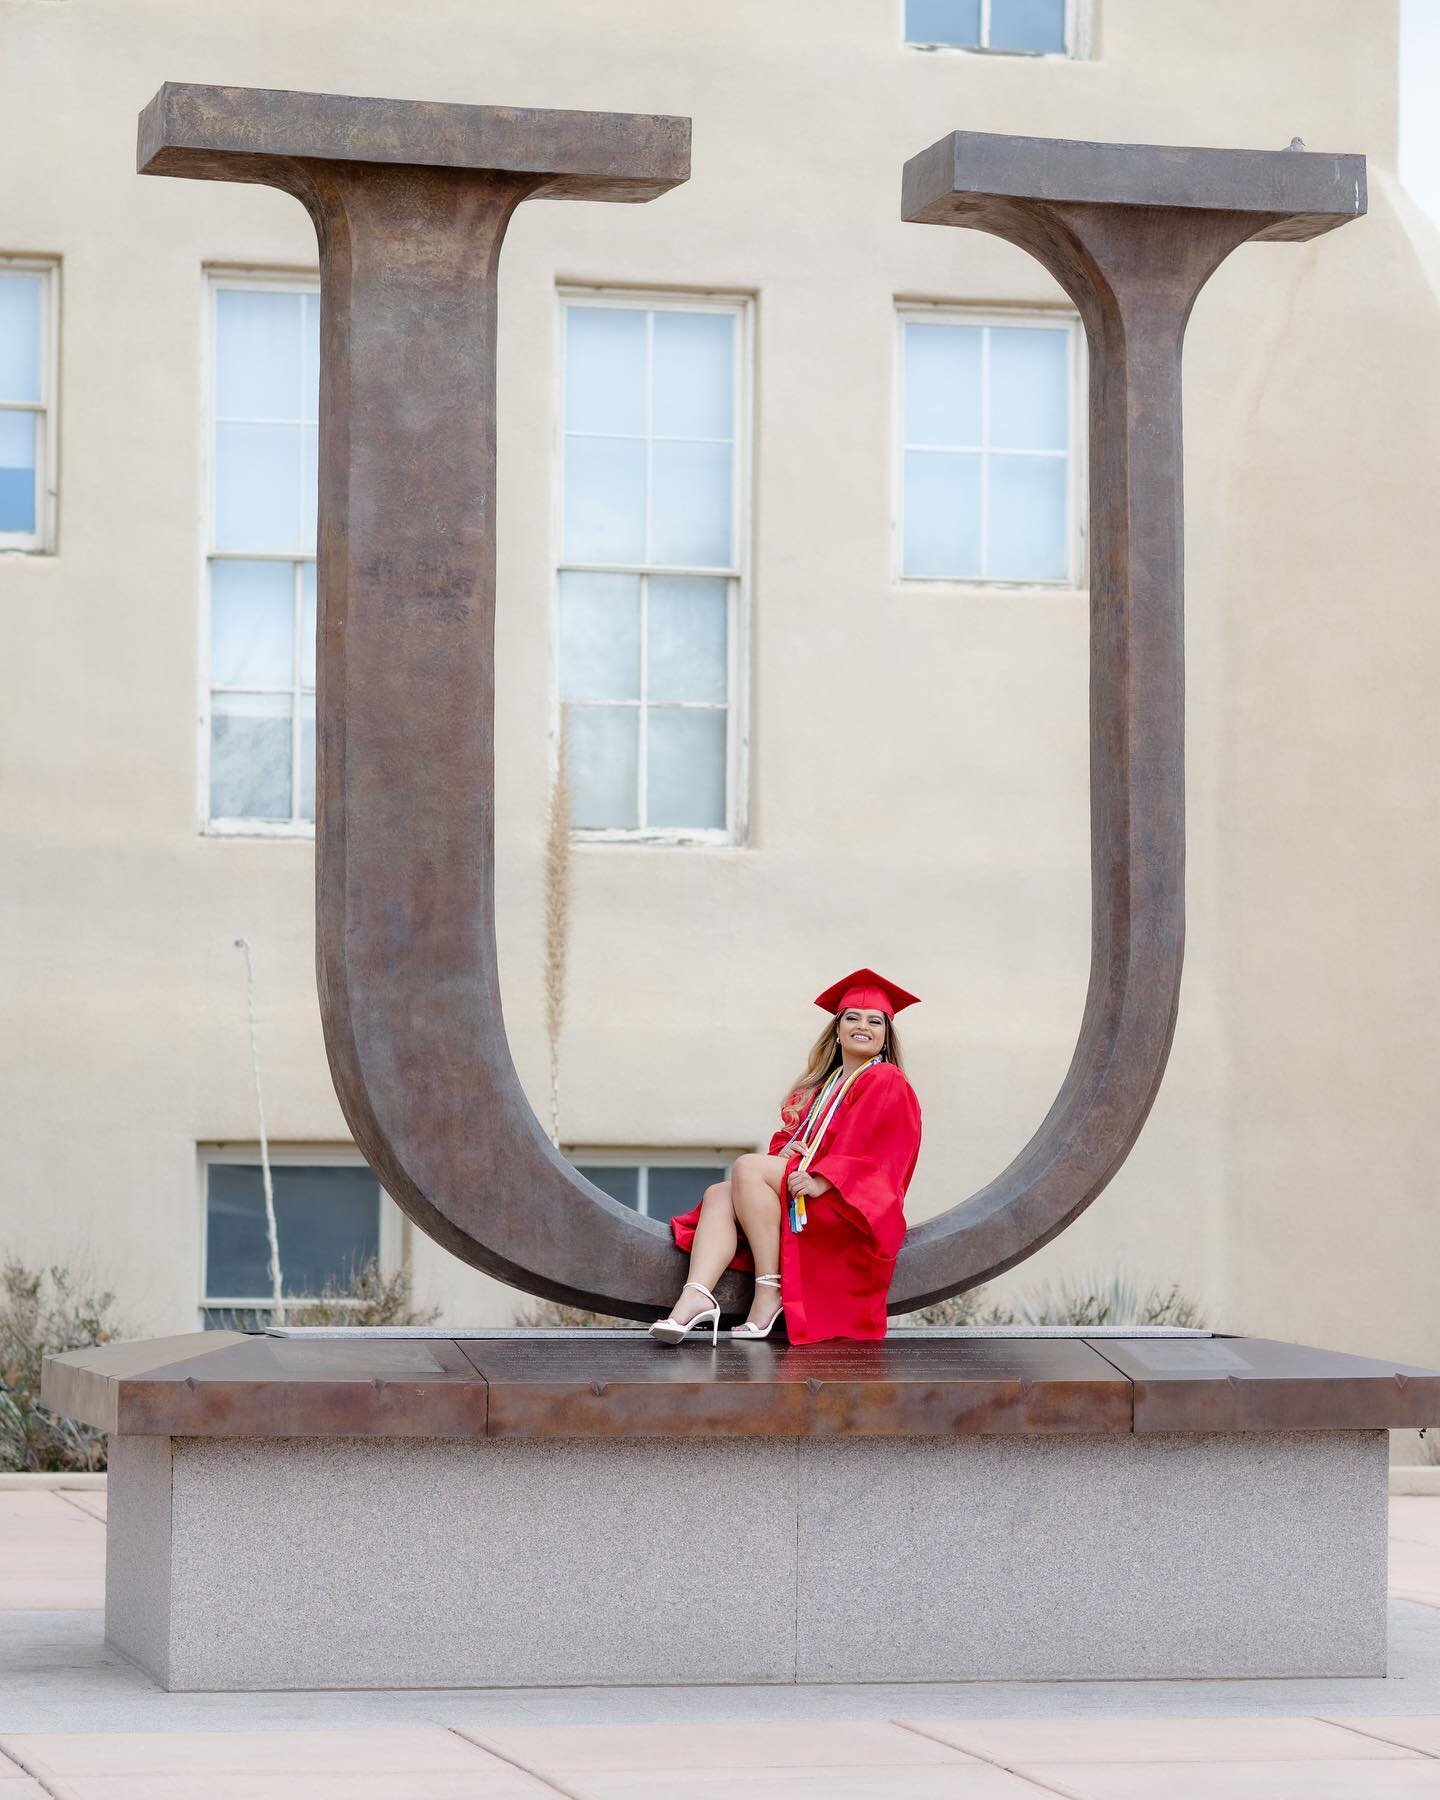 Kennedy is a beautiful, strong, young woman with a very bright future. She is graduating from UNM with a degree in Communications and Criminal Justice. Congratulations Kennedy 🎉🥳👏. We are so excited for you.